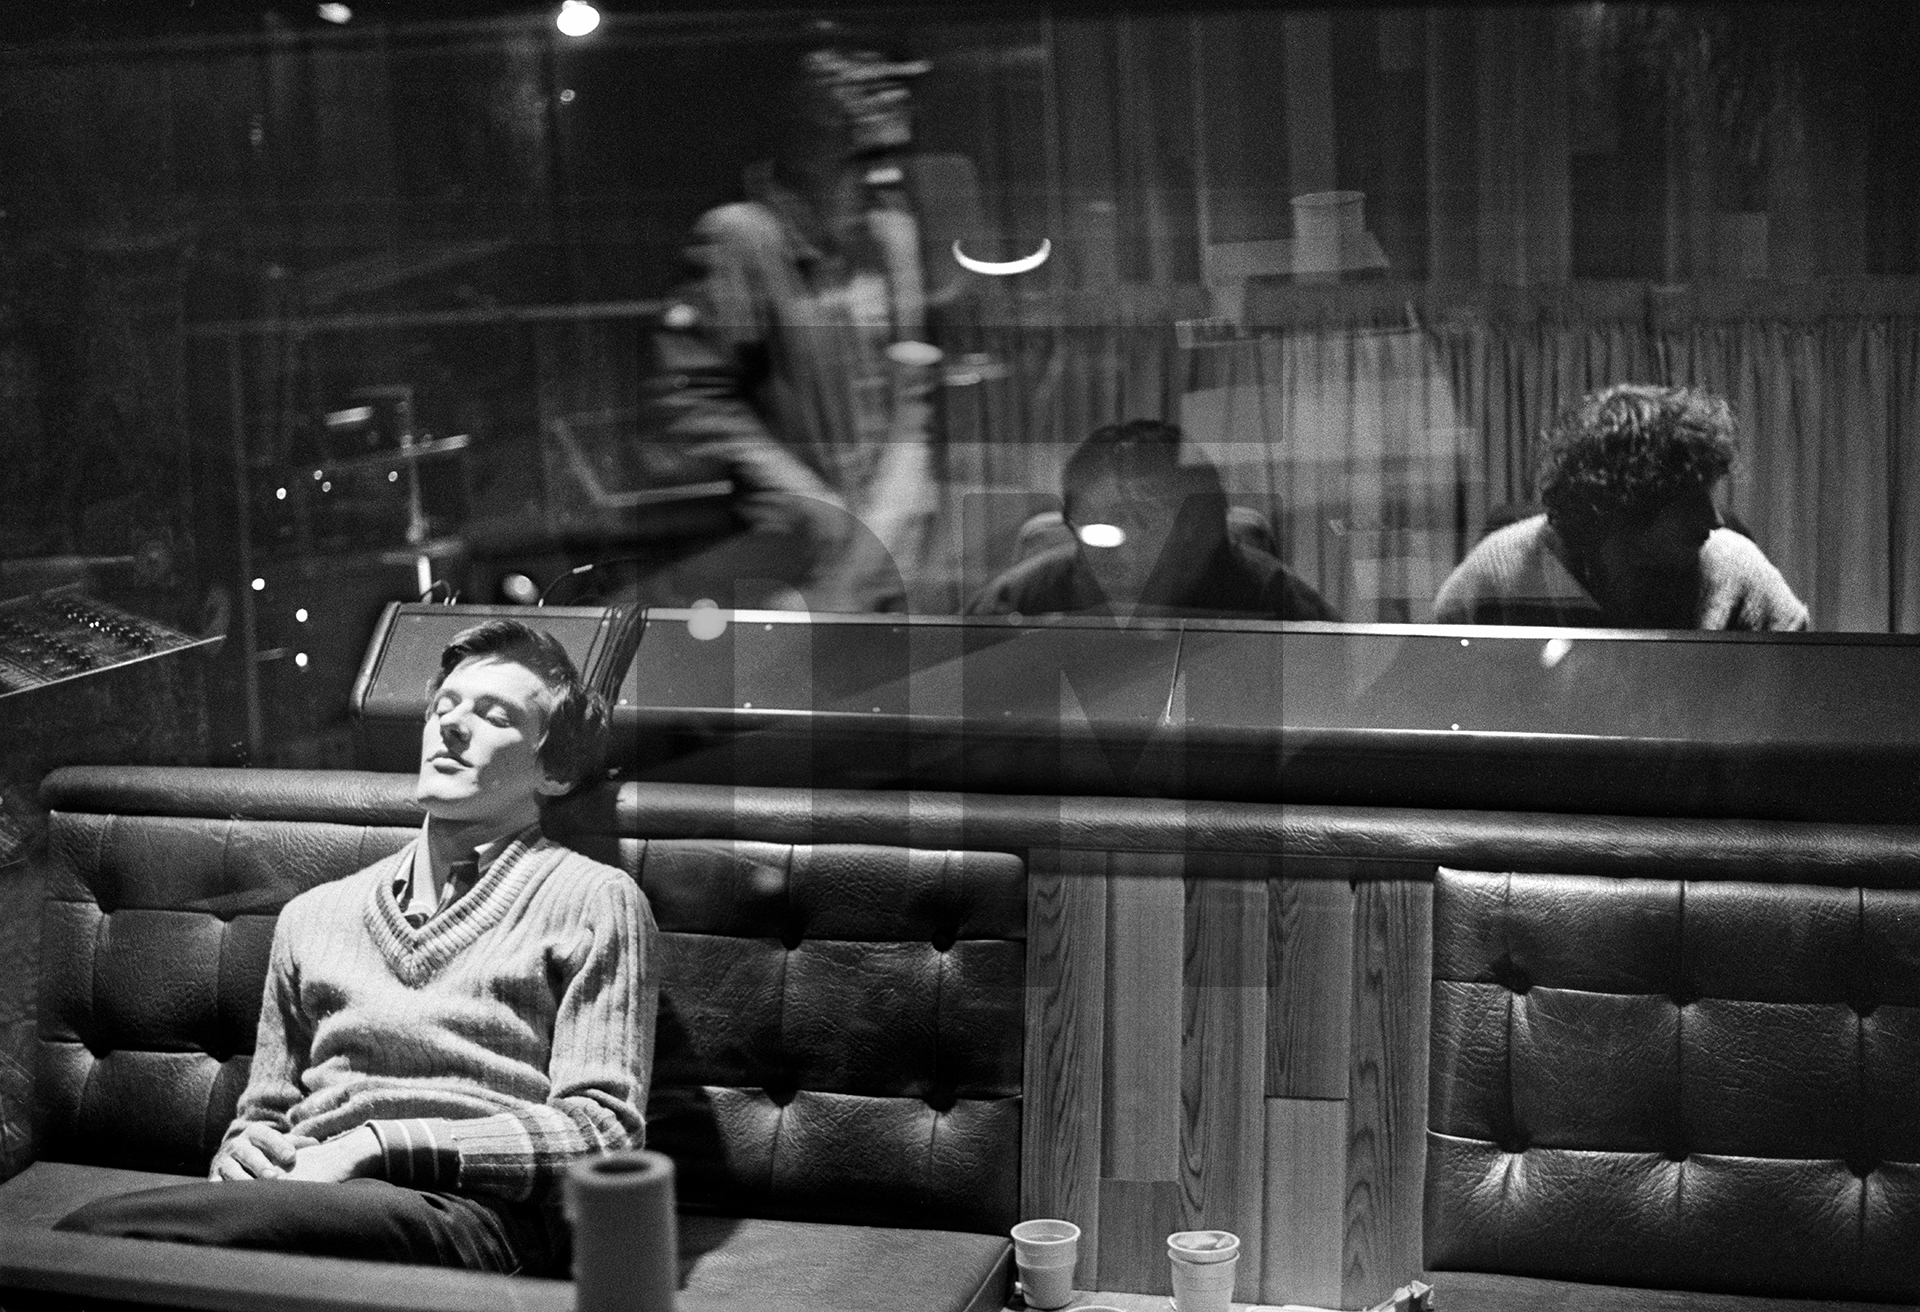 Stephen Morris, drummer with Joy Division, in Pennine Sound Studio, Oldham. January 1980 by Daniel Meadows